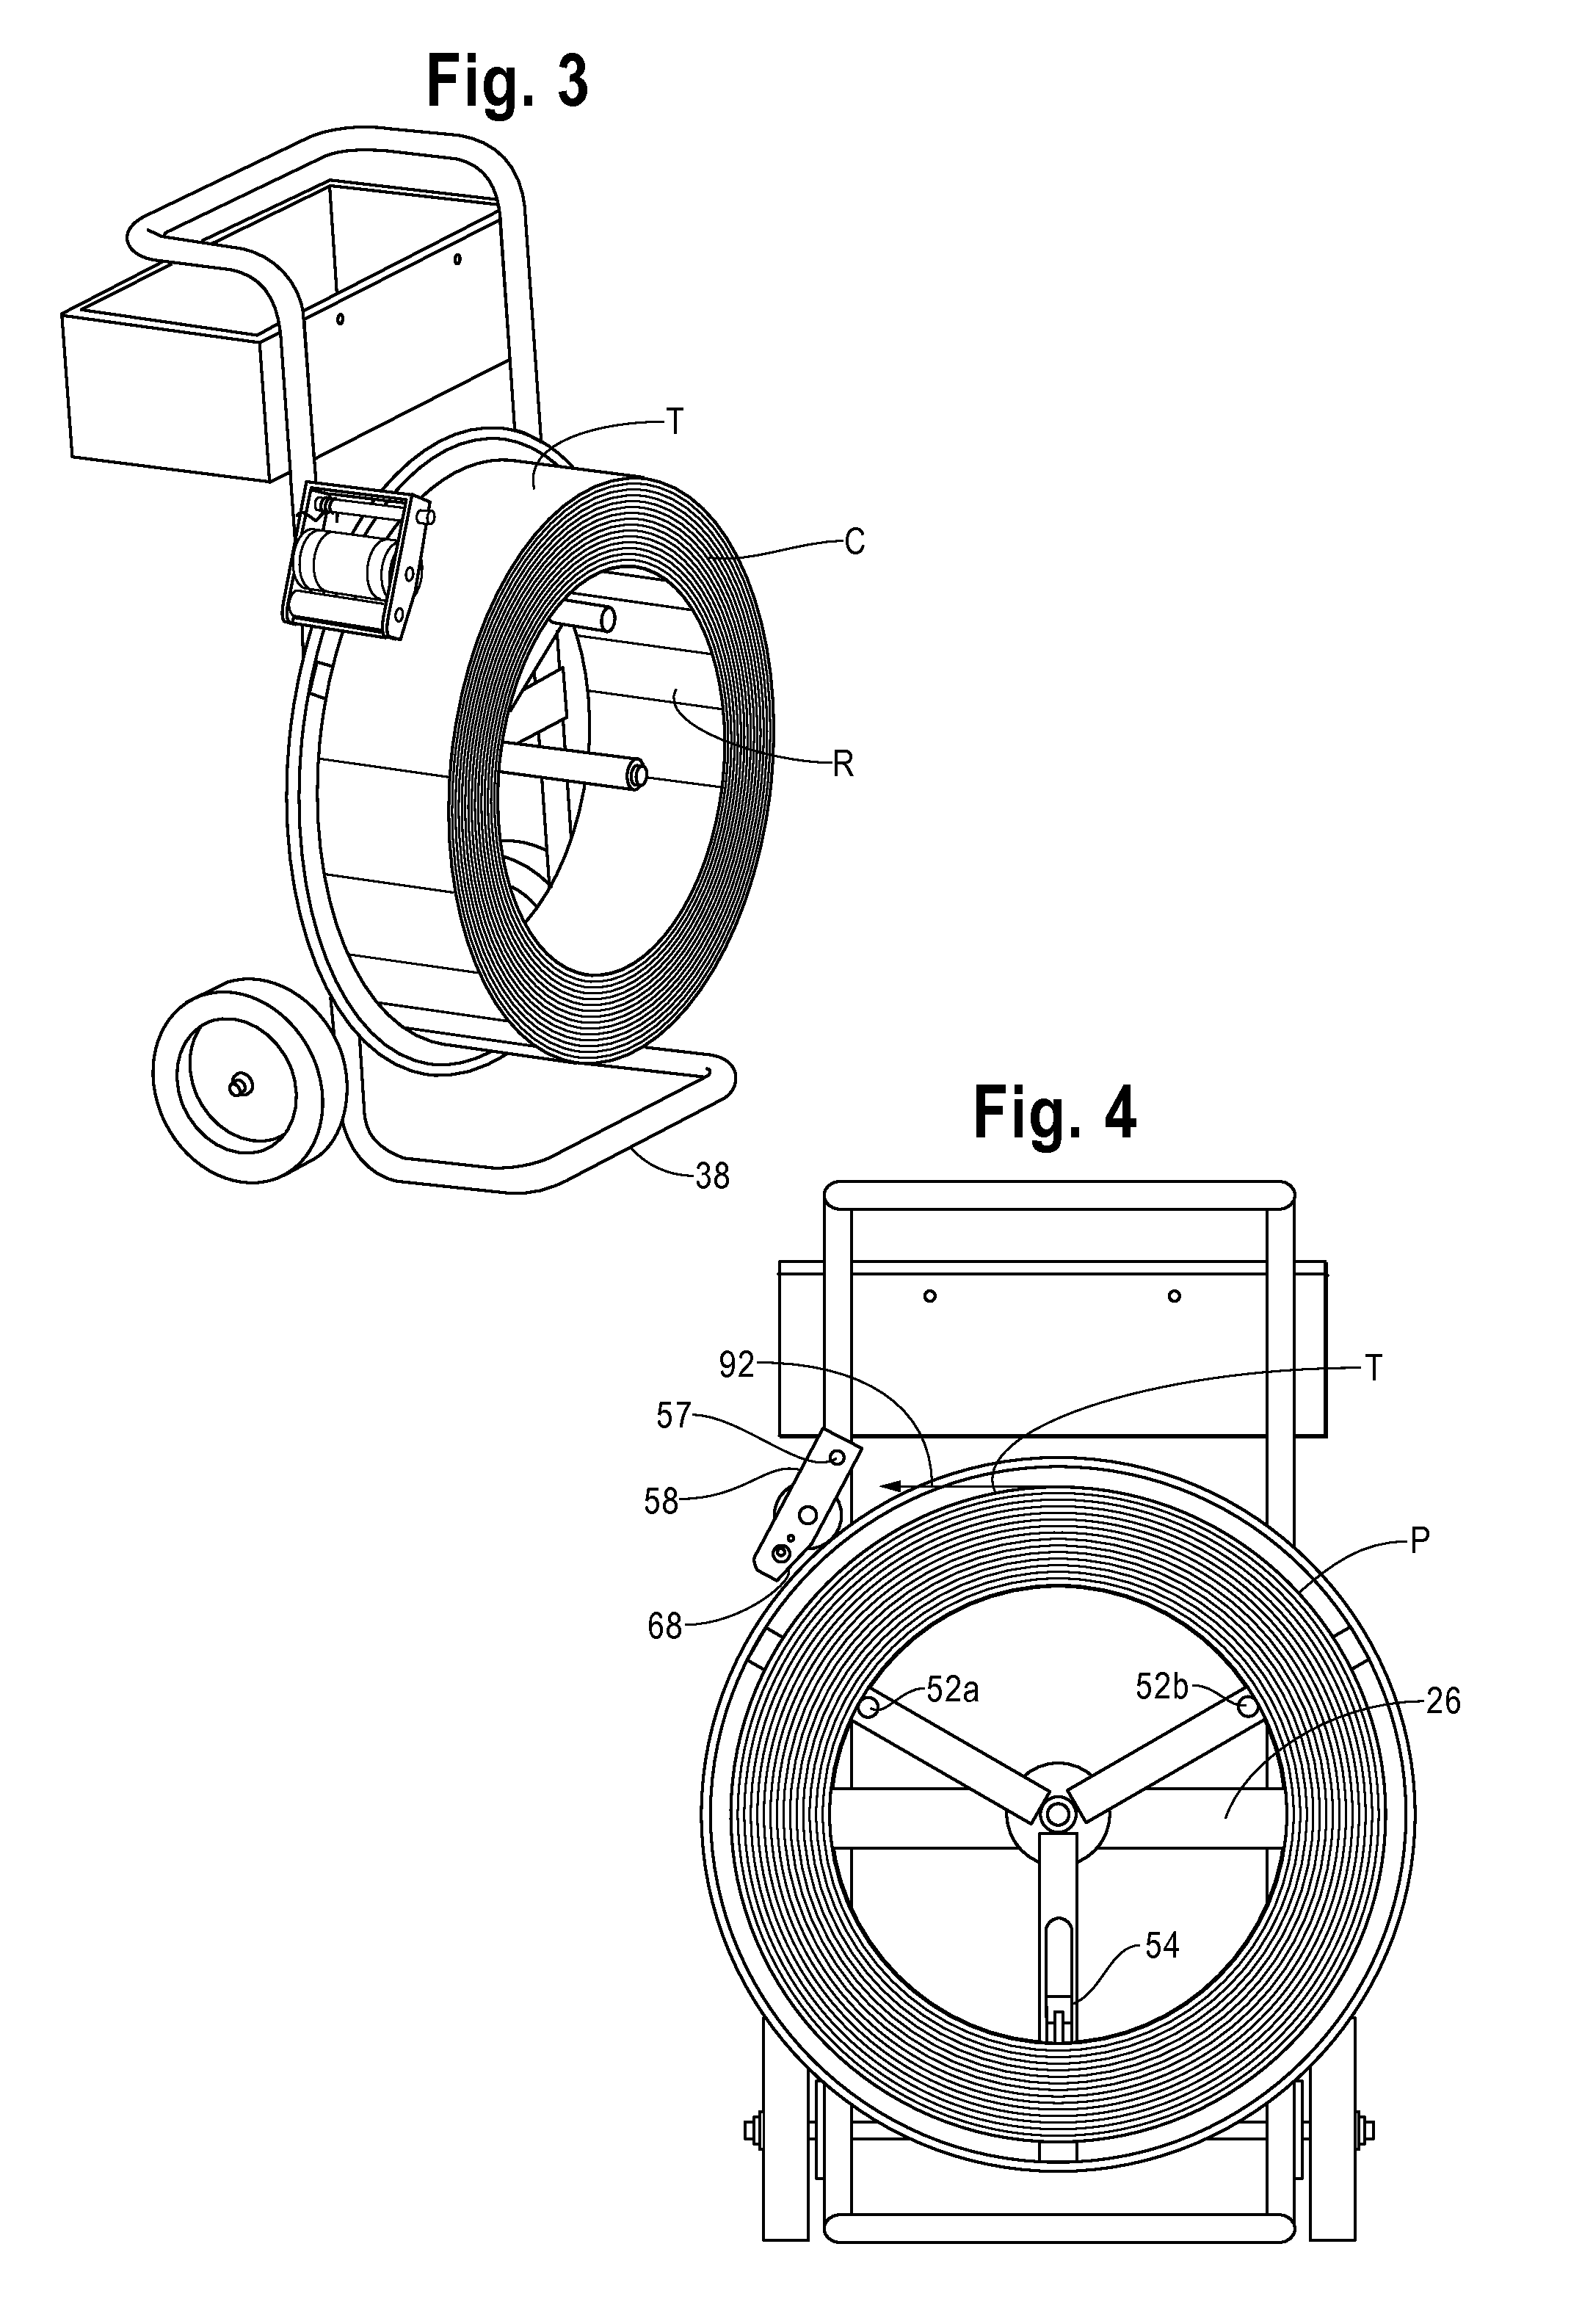 Cart type strap dispenser with improved strap brake/payout assembly